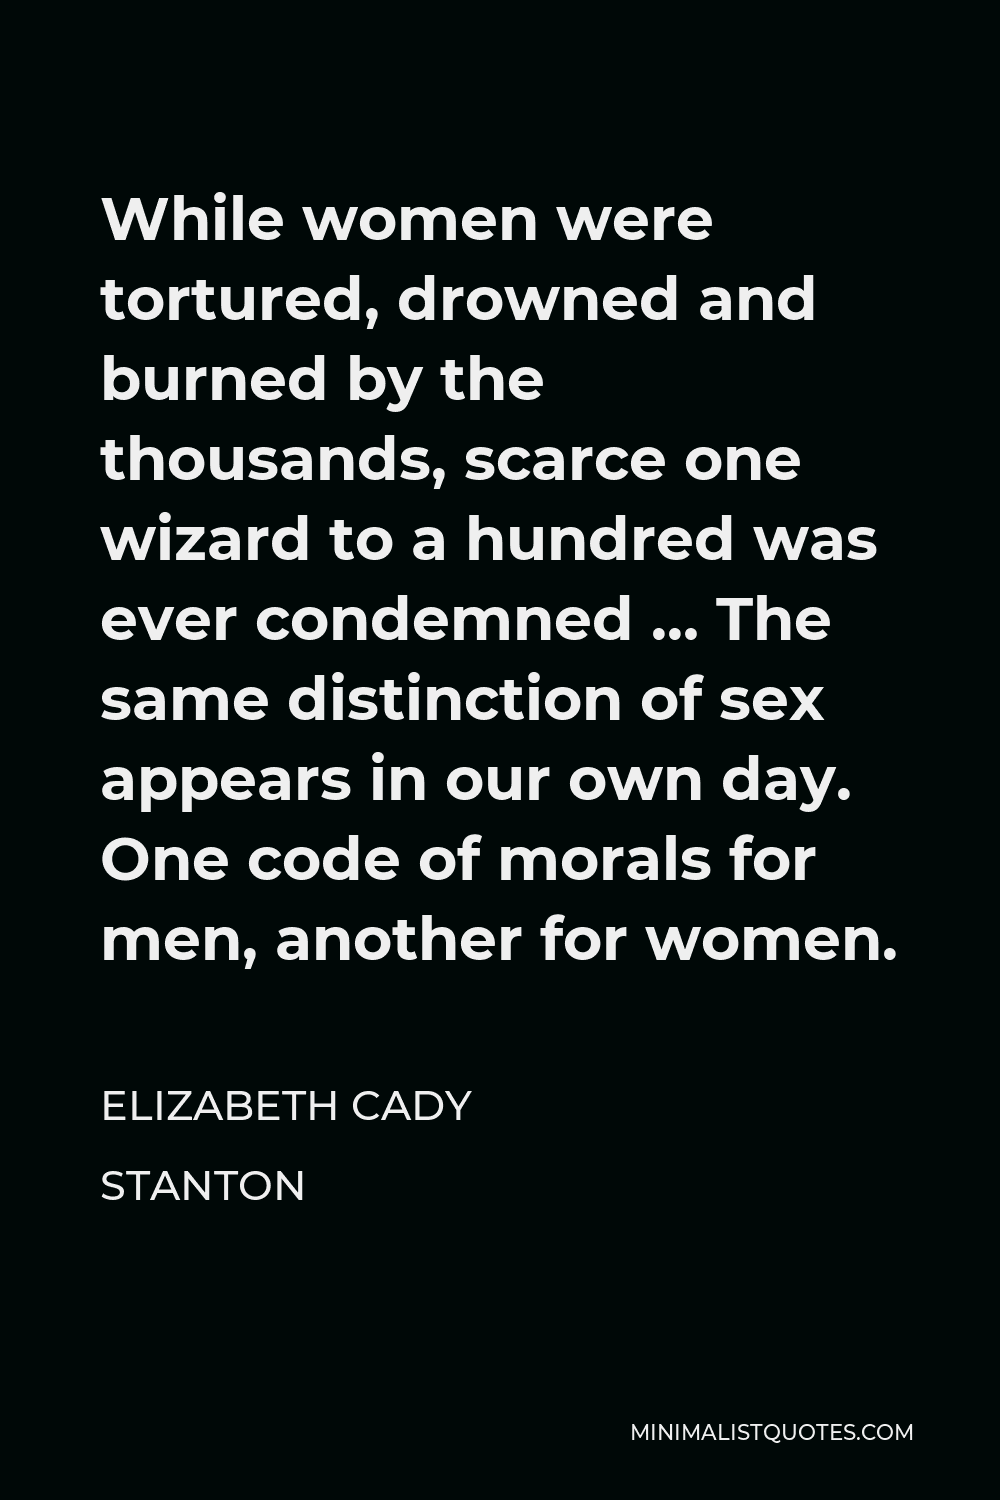 Elizabeth Cady Stanton Quote - While women were tortured, drowned and burned by the thousands, scarce one wizard to a hundred was ever condemned … The same distinction of sex appears in our own day. One code of morals for men, another for women.